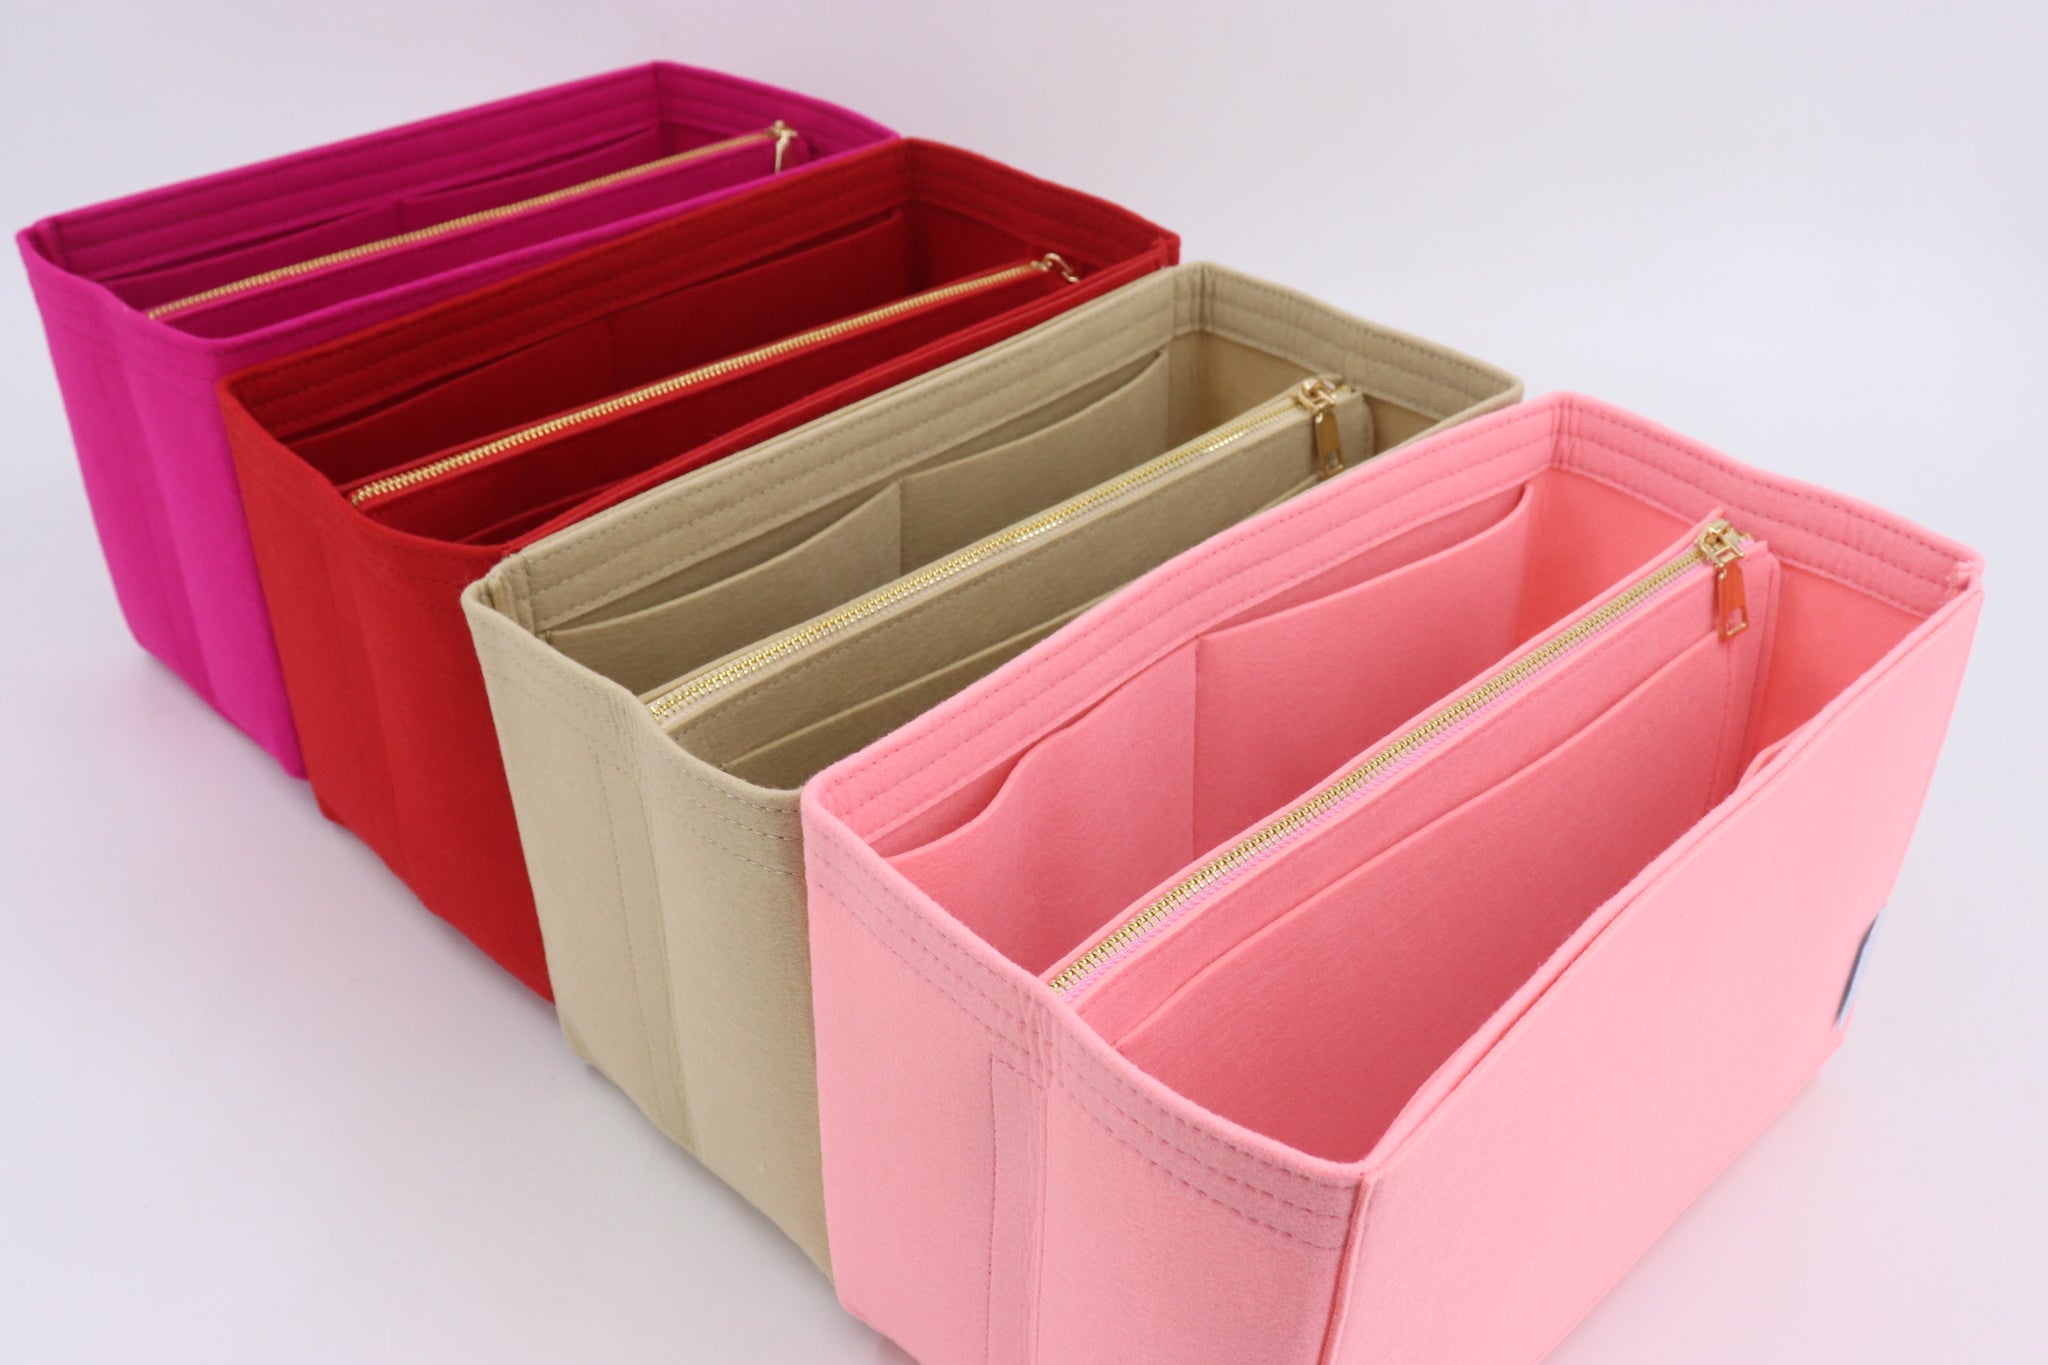 Bag and Purse Organizer with Basic Style for Speedy 25, Speedy 30, Speedy  35 and Speedy 40.